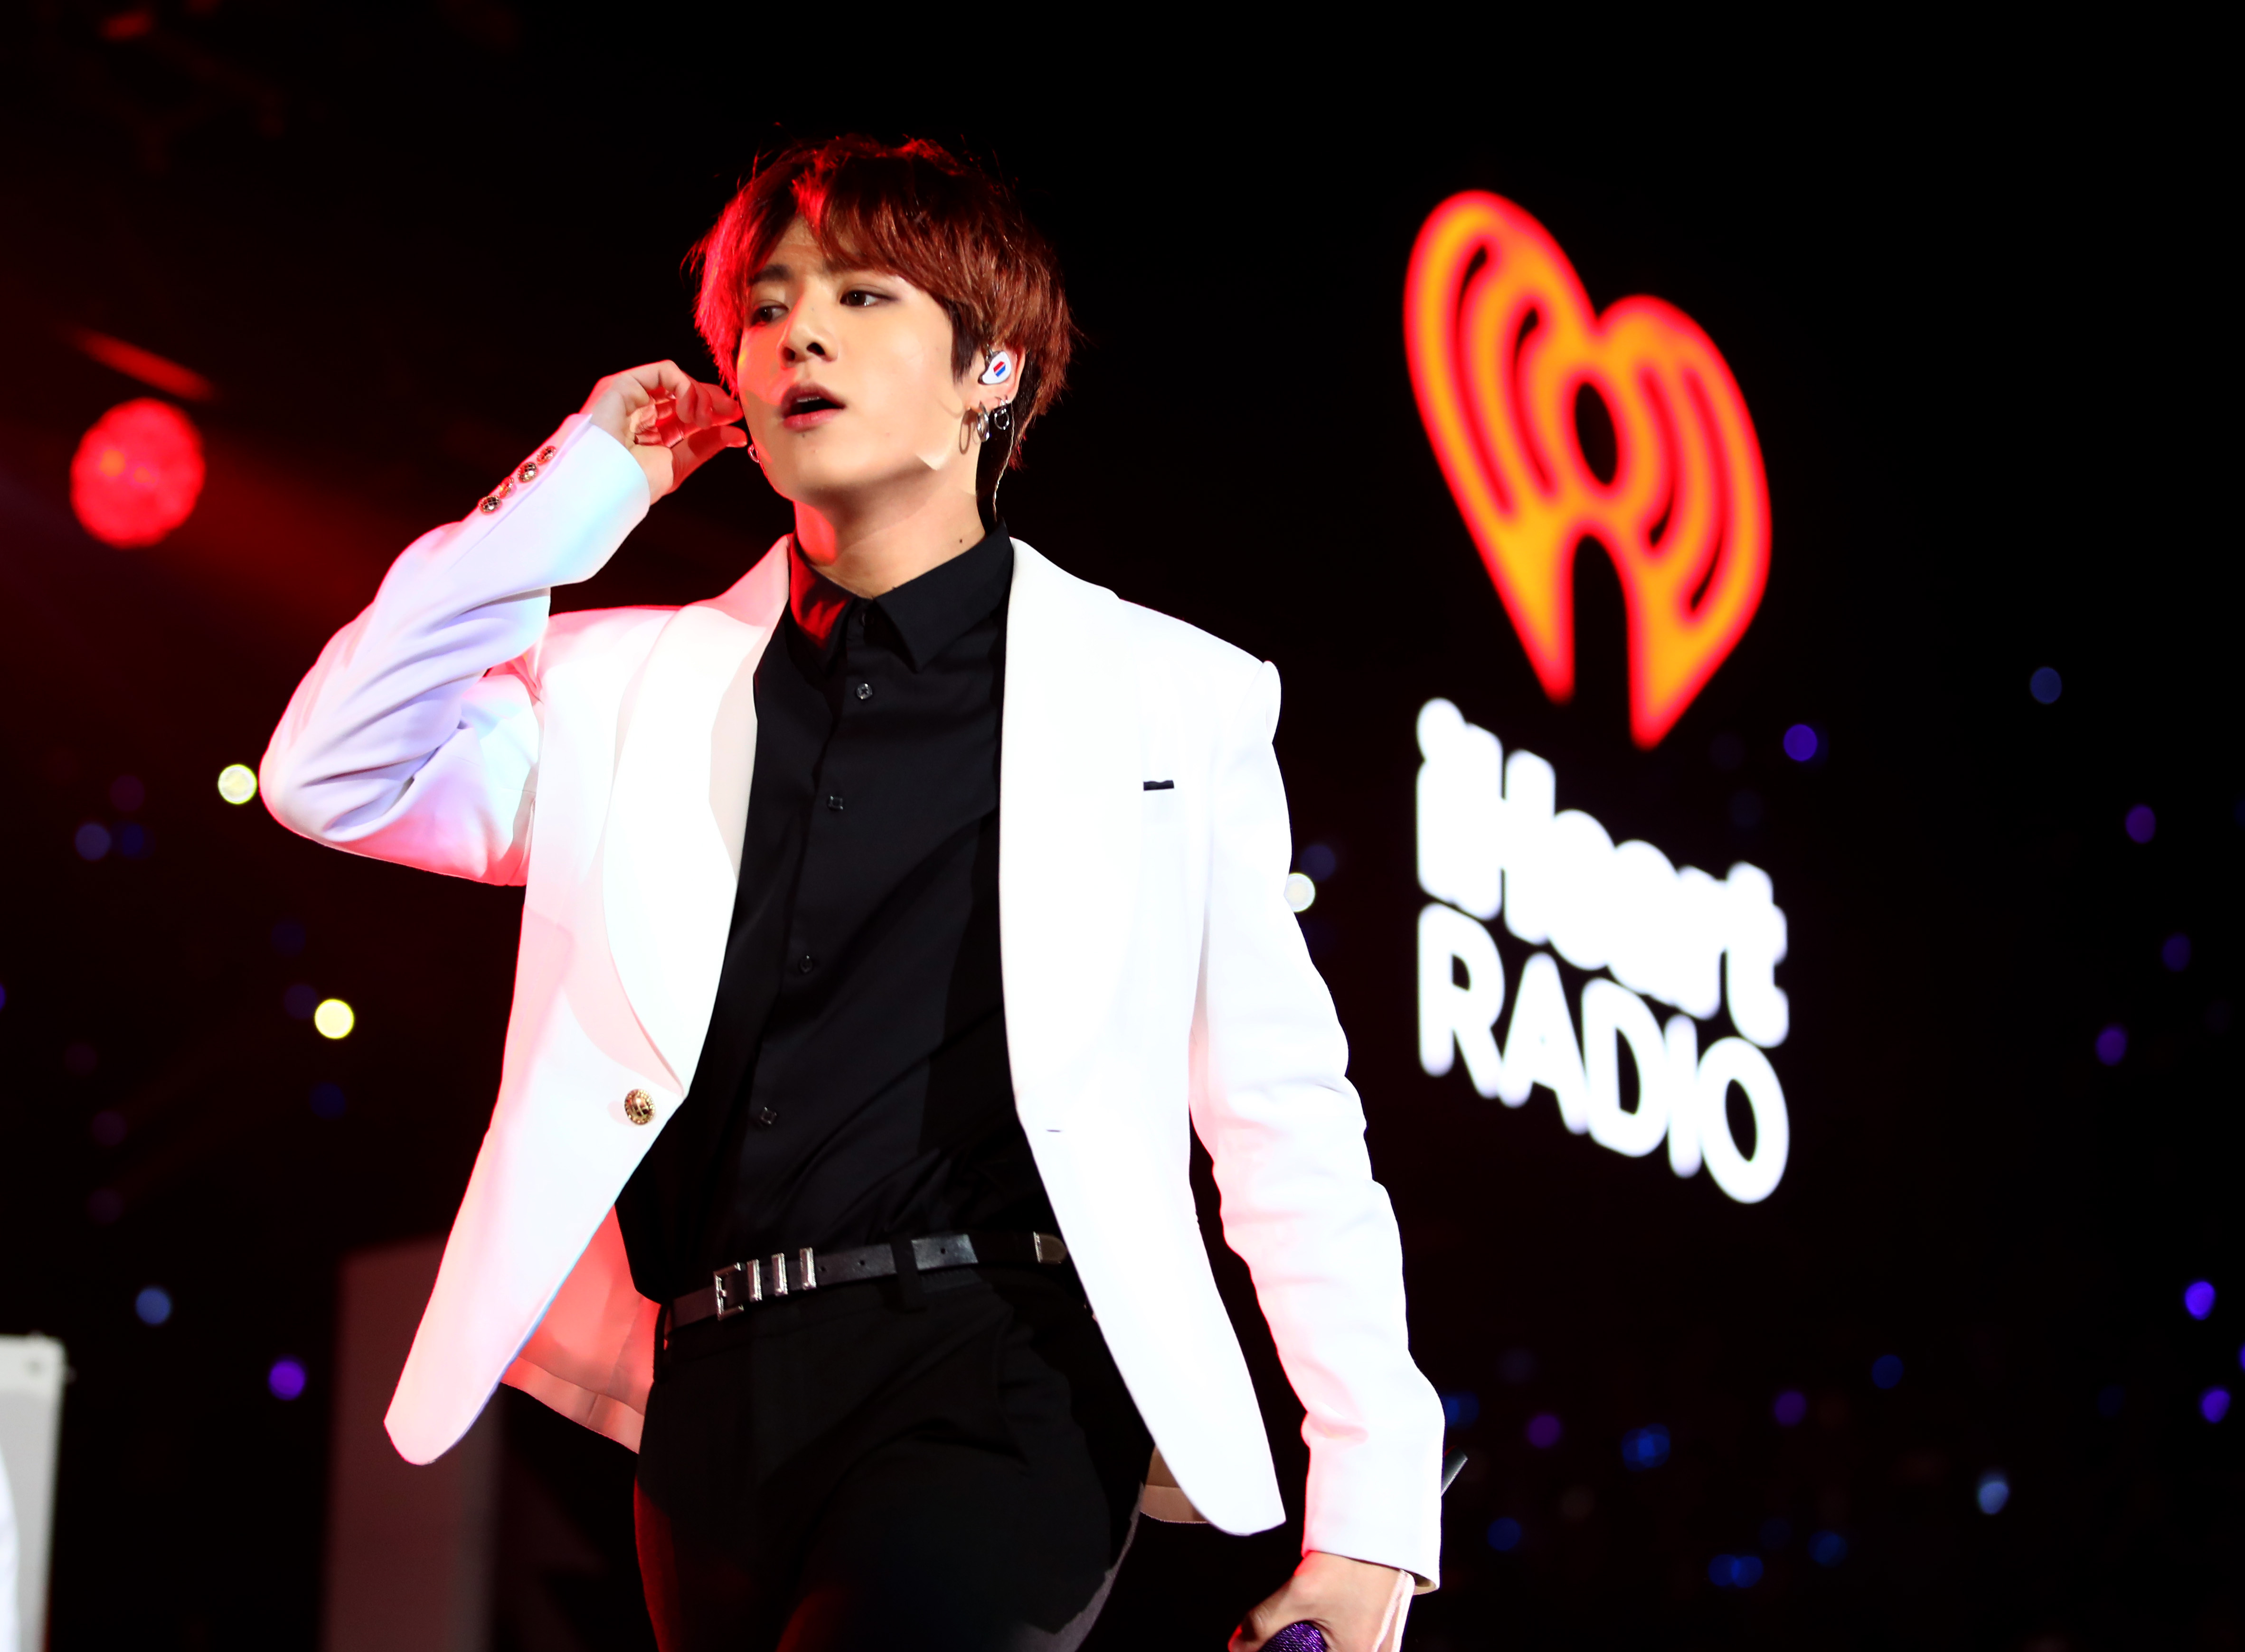 Jungkook of BTS onstage during 102.7 KIIS FM's Jingle Ball 2019 Presented by Capital One at the Forum on December 6, 2019 in Los Angeles, California | Source: Getty Images